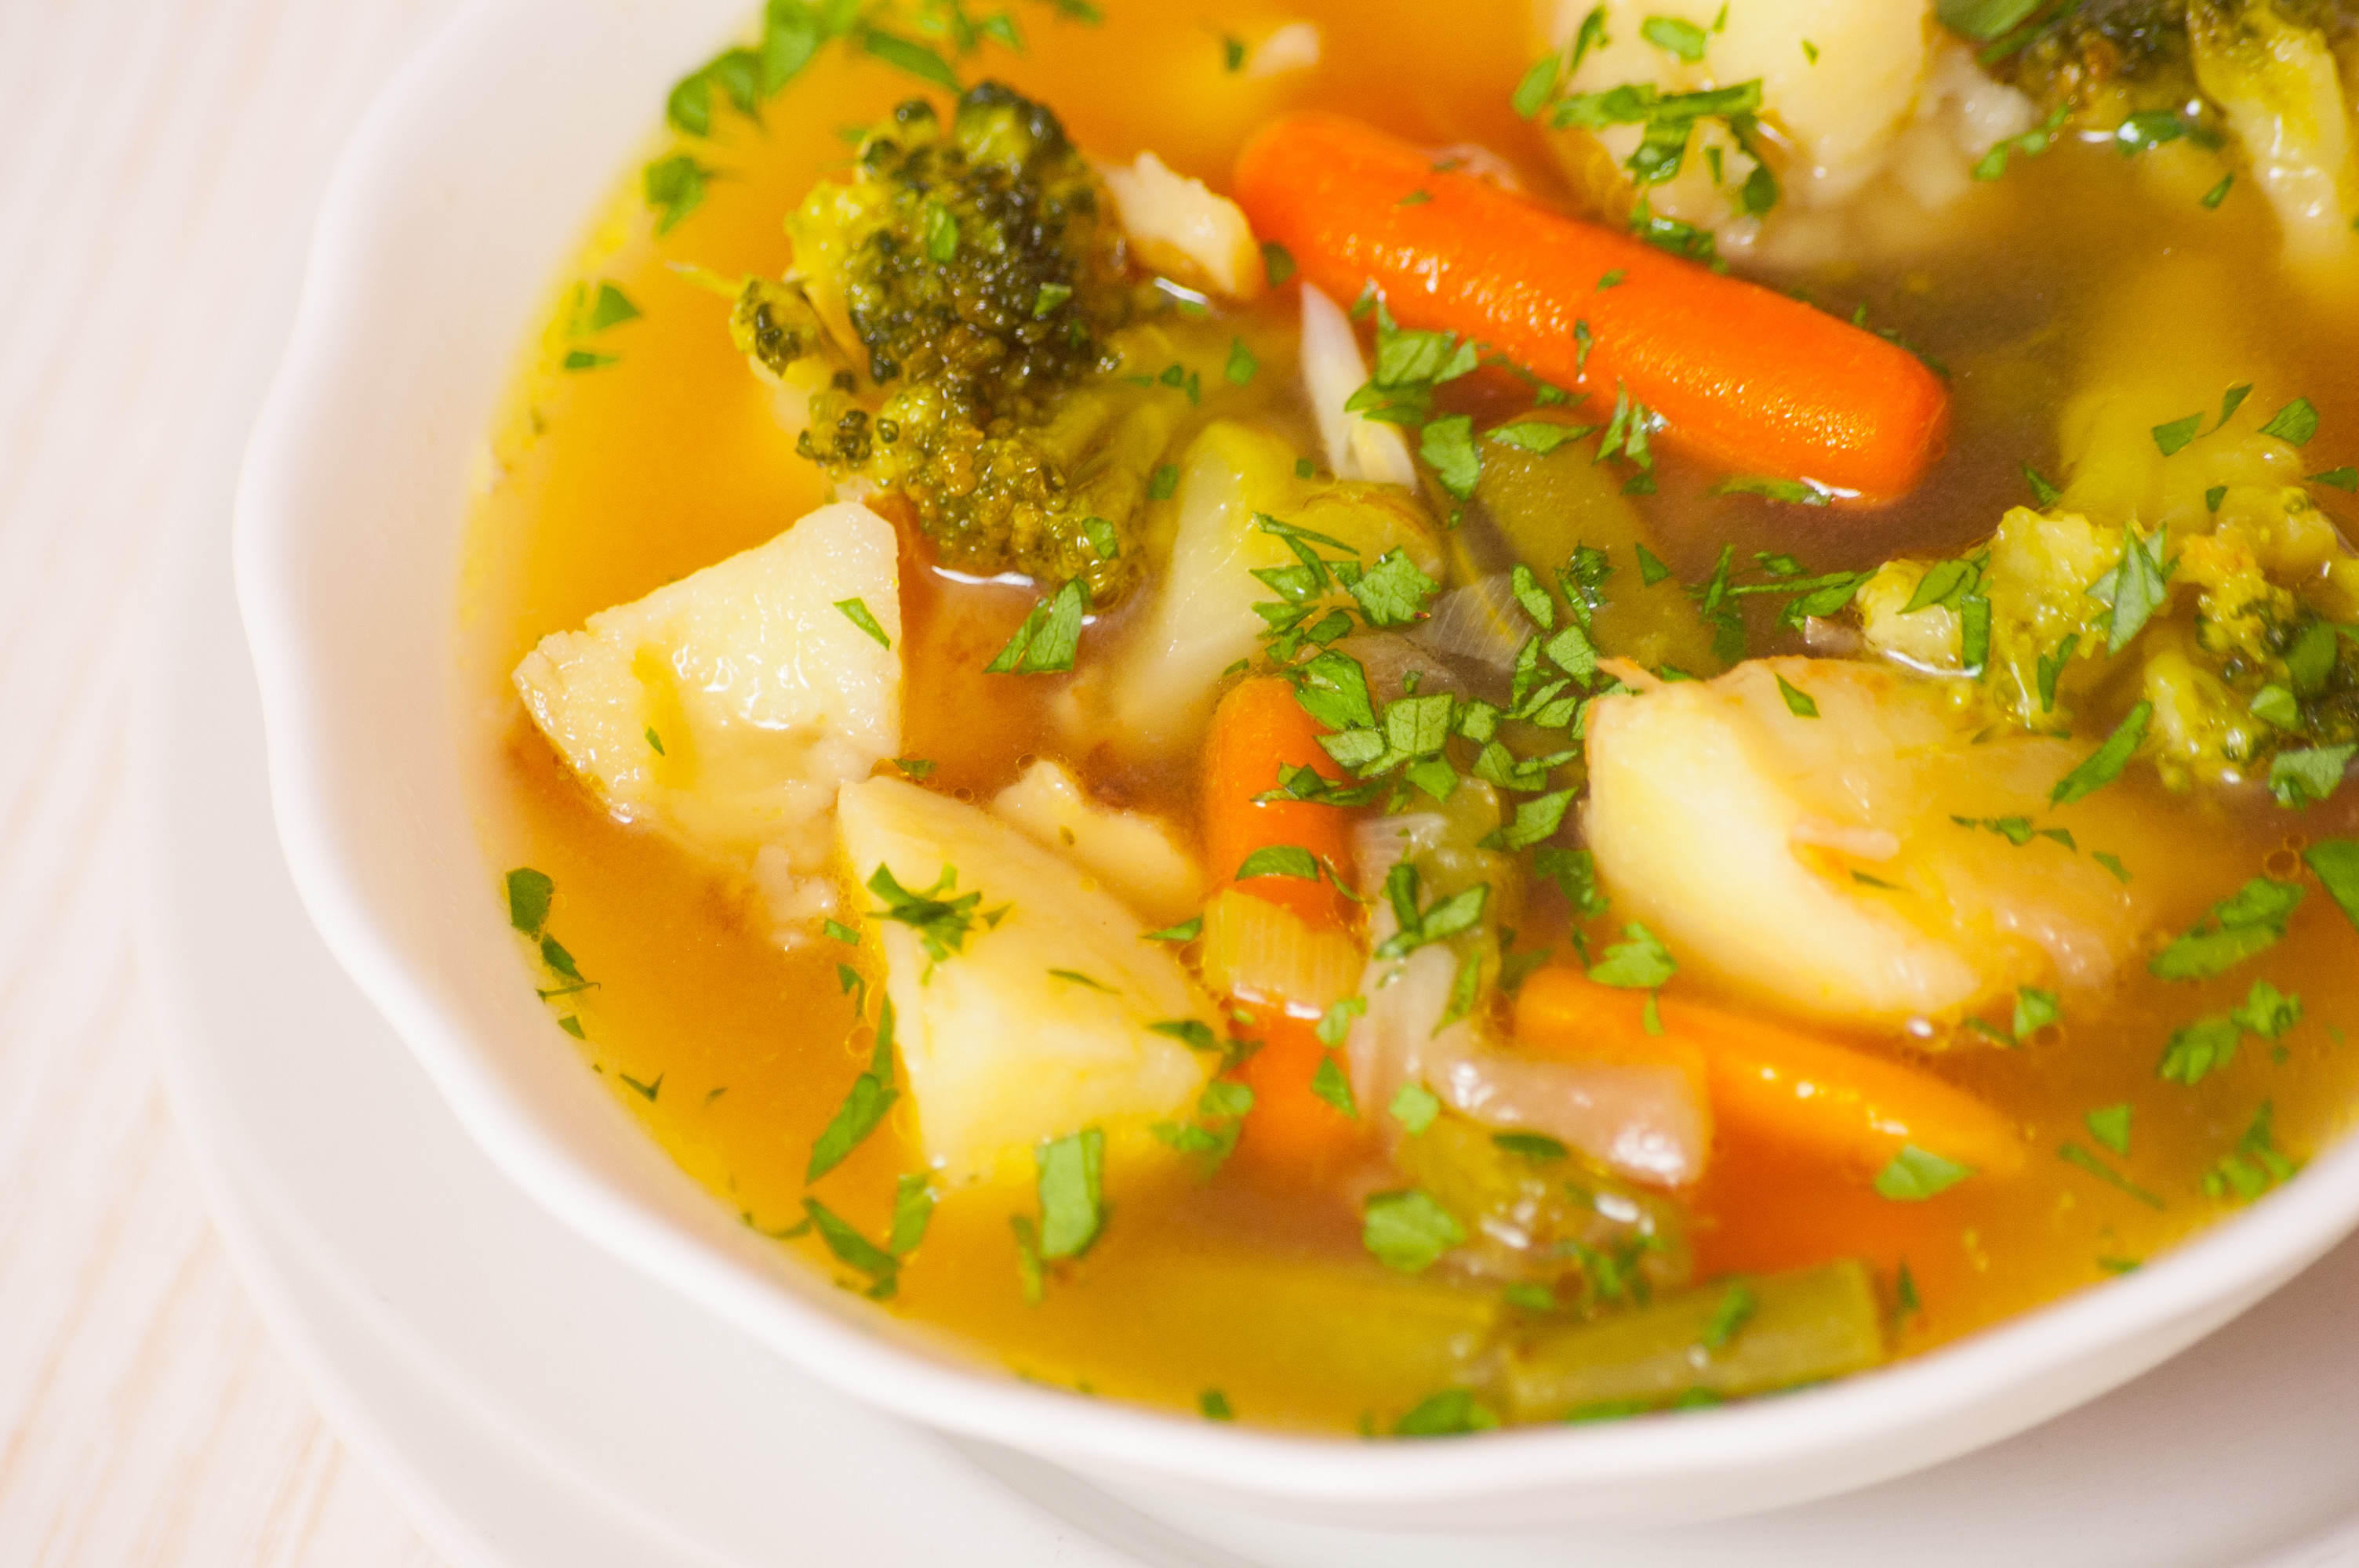 Bowl of Vegetable Soup © Can Stock Photo / gongzstudio